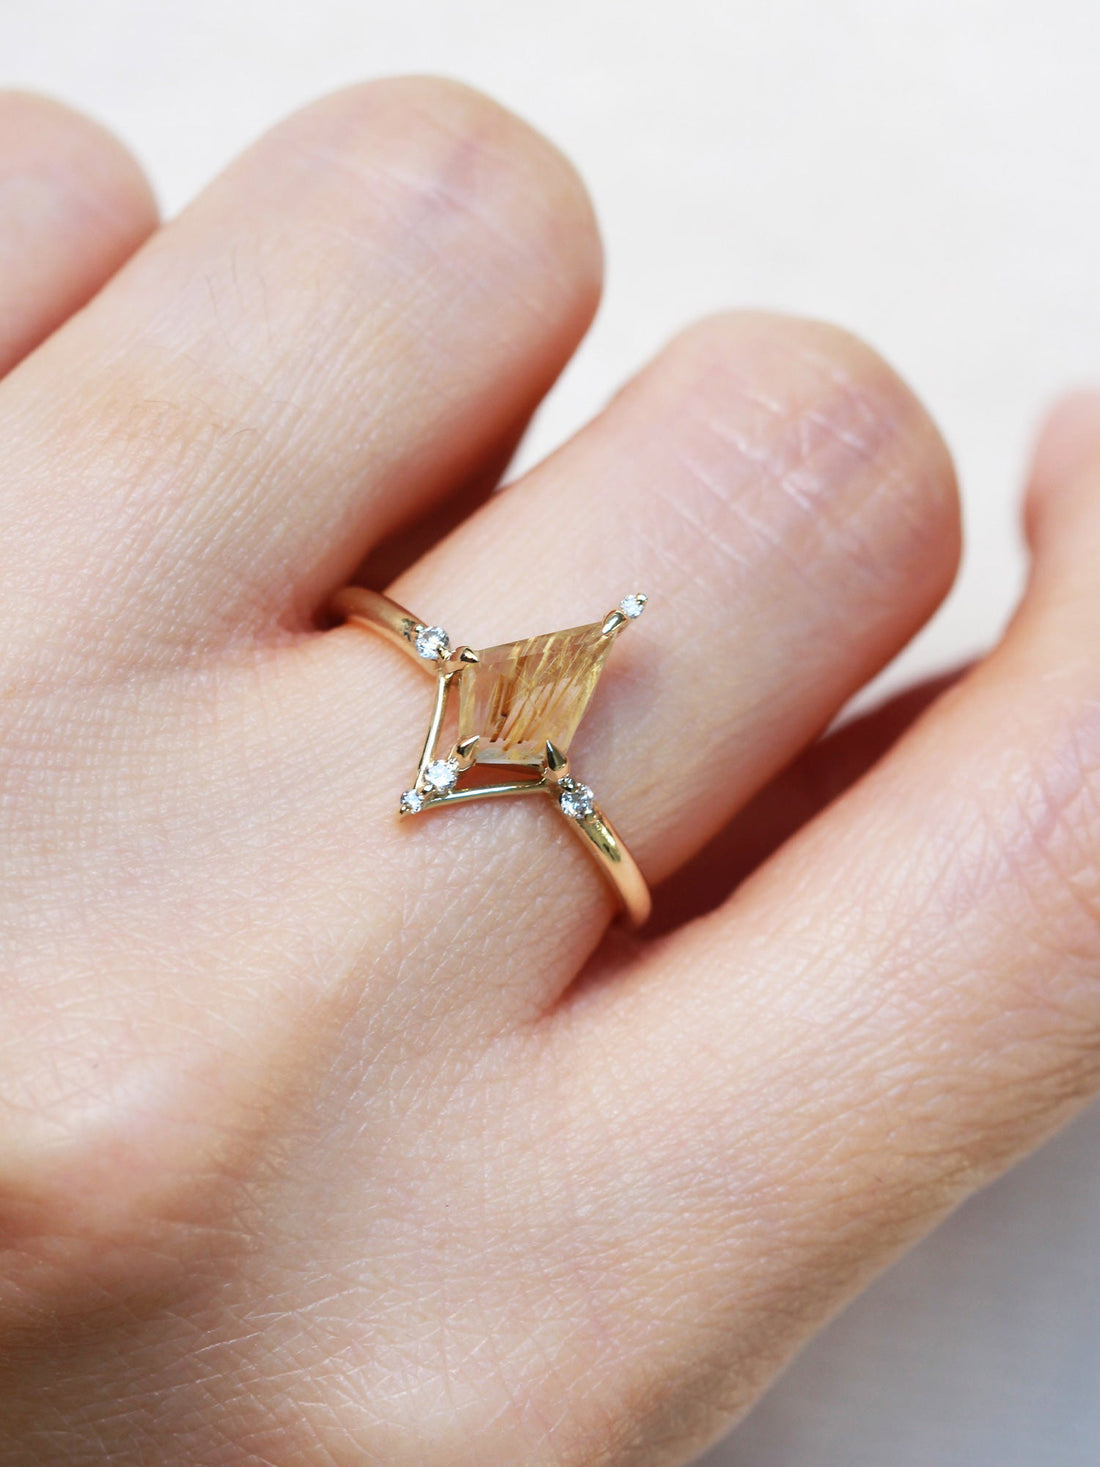 Kite shape rutilated quartz engagement ring with smaller round diamonds in 14k gold inspired by the art deco style and minimalism on model&